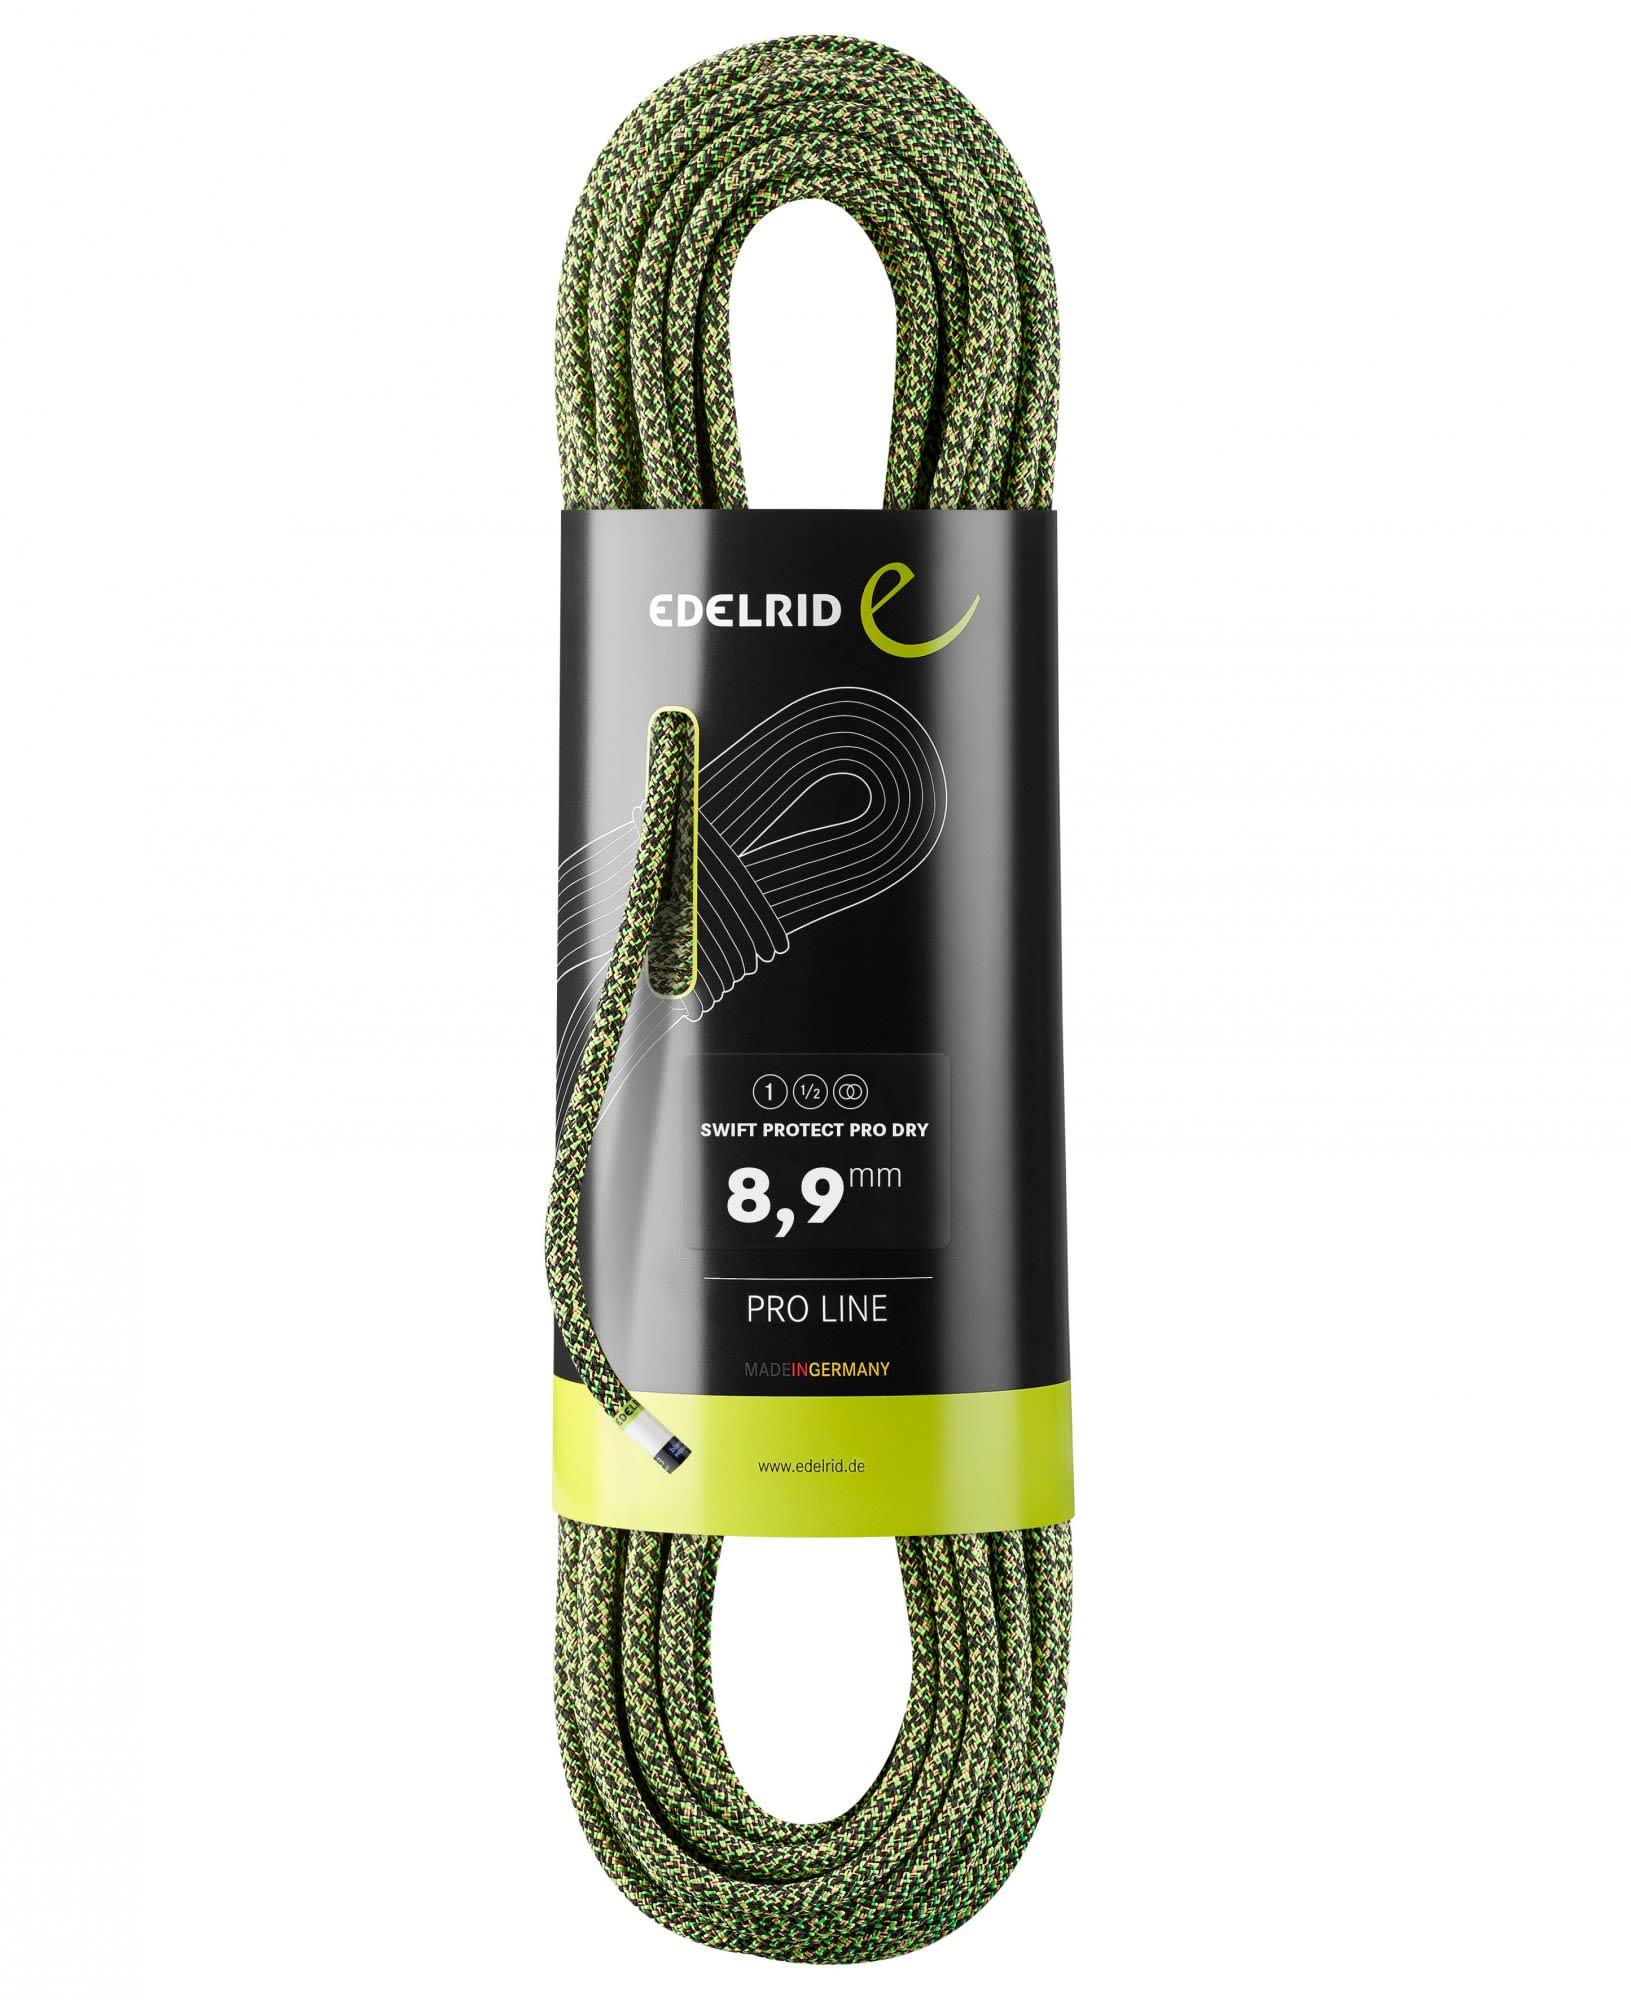 Edelrid Swift Protect Pro Dry 8.9 mm Climbing rope-Night/Green-70 M